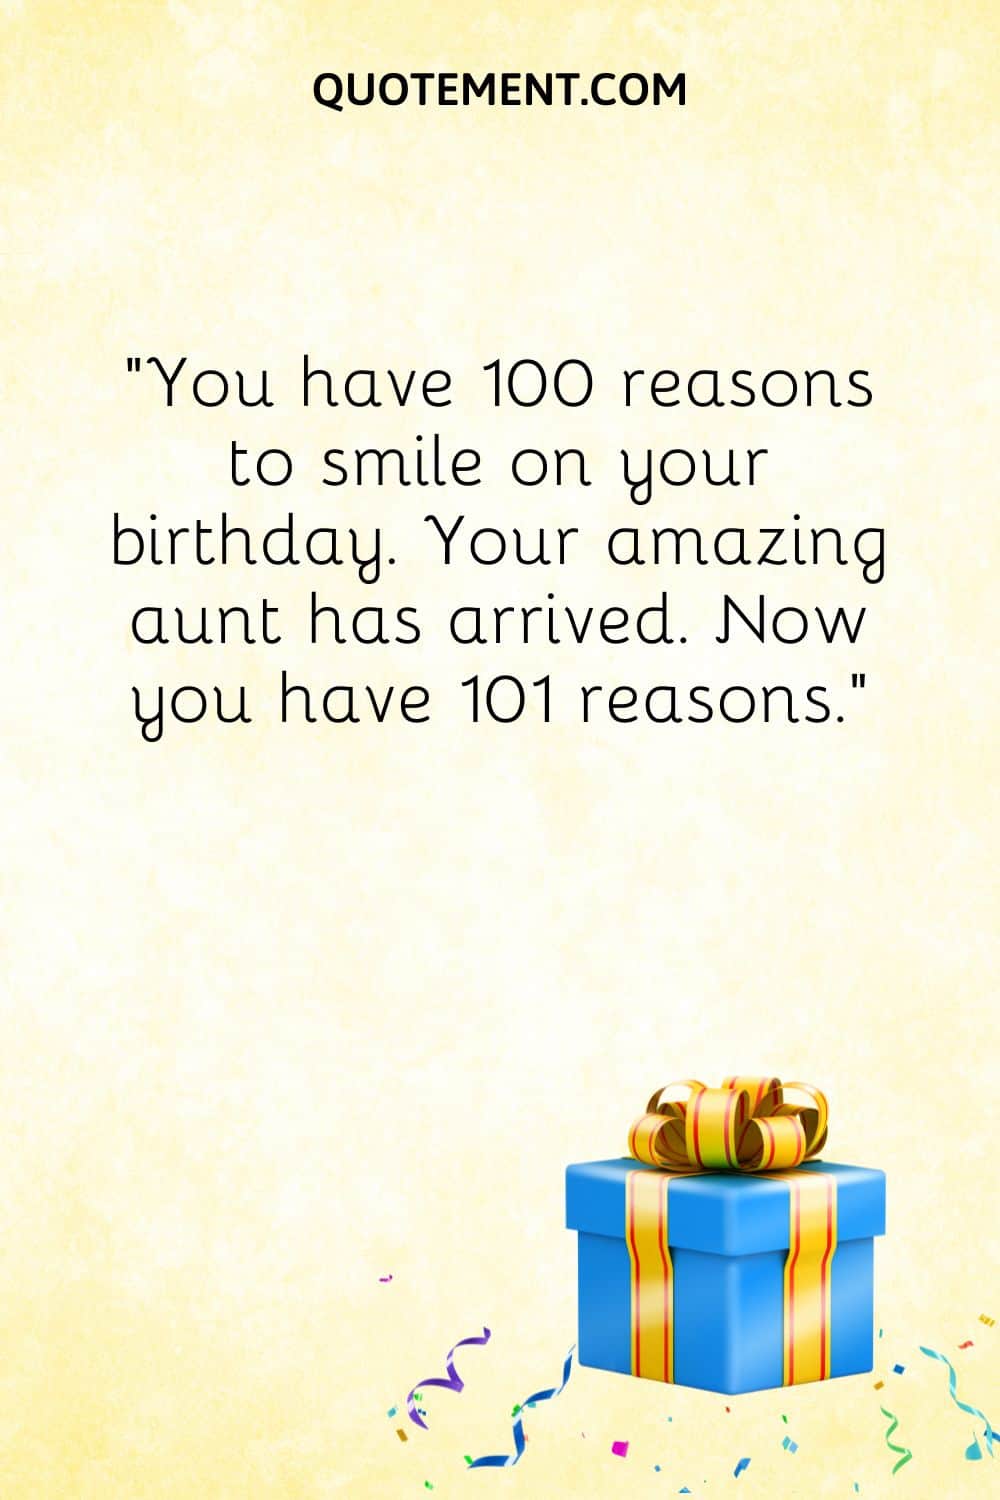 “You have 100 reasons to smile on your birthday. Your amazing aunt has arrived. Now you have 101 reasons.”